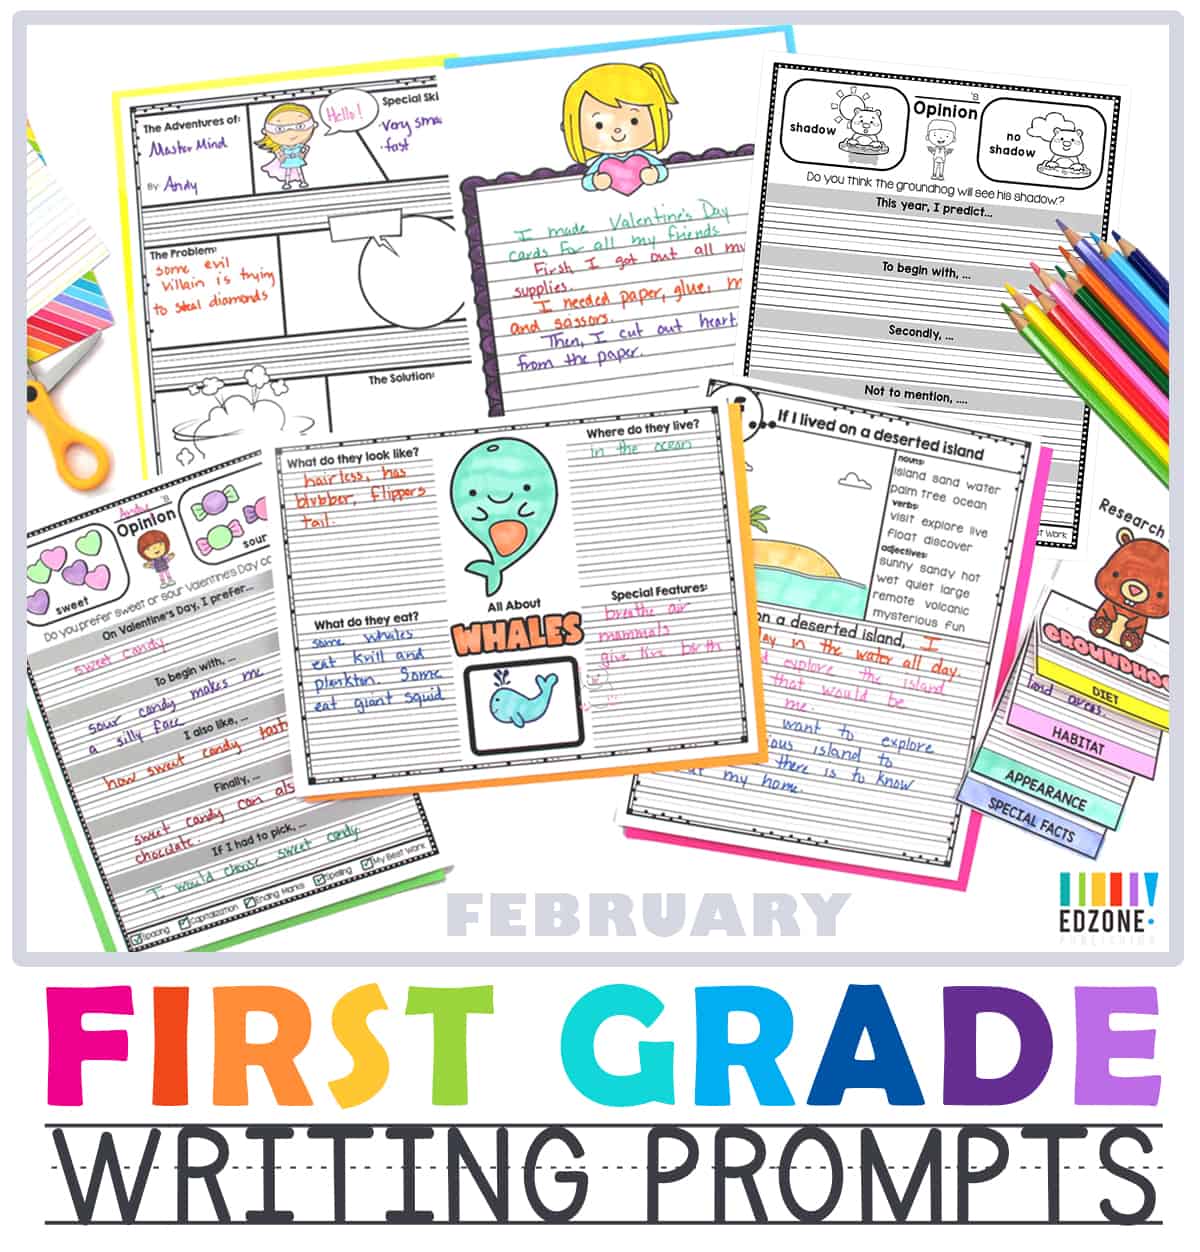 First Grade Writing Prompts - The Crafty Classroom